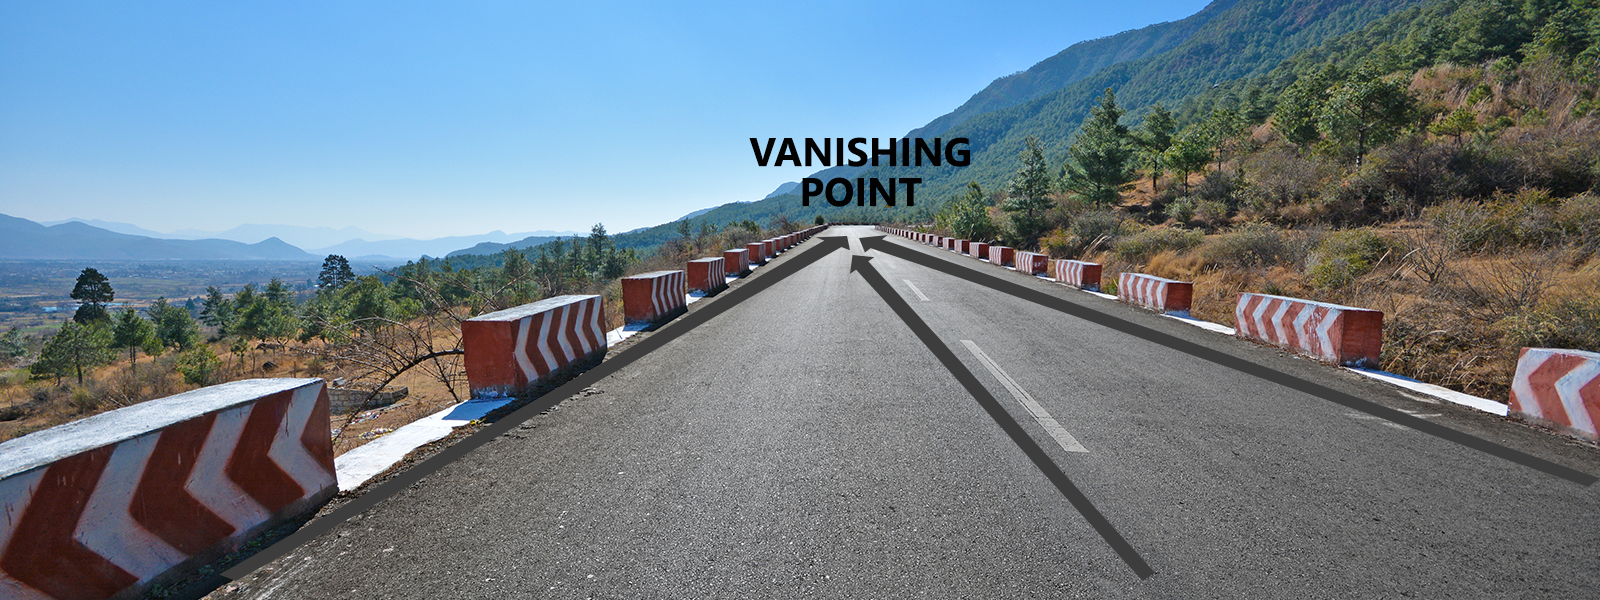 Demonstrates the "Vanishing Point" effect on a real image